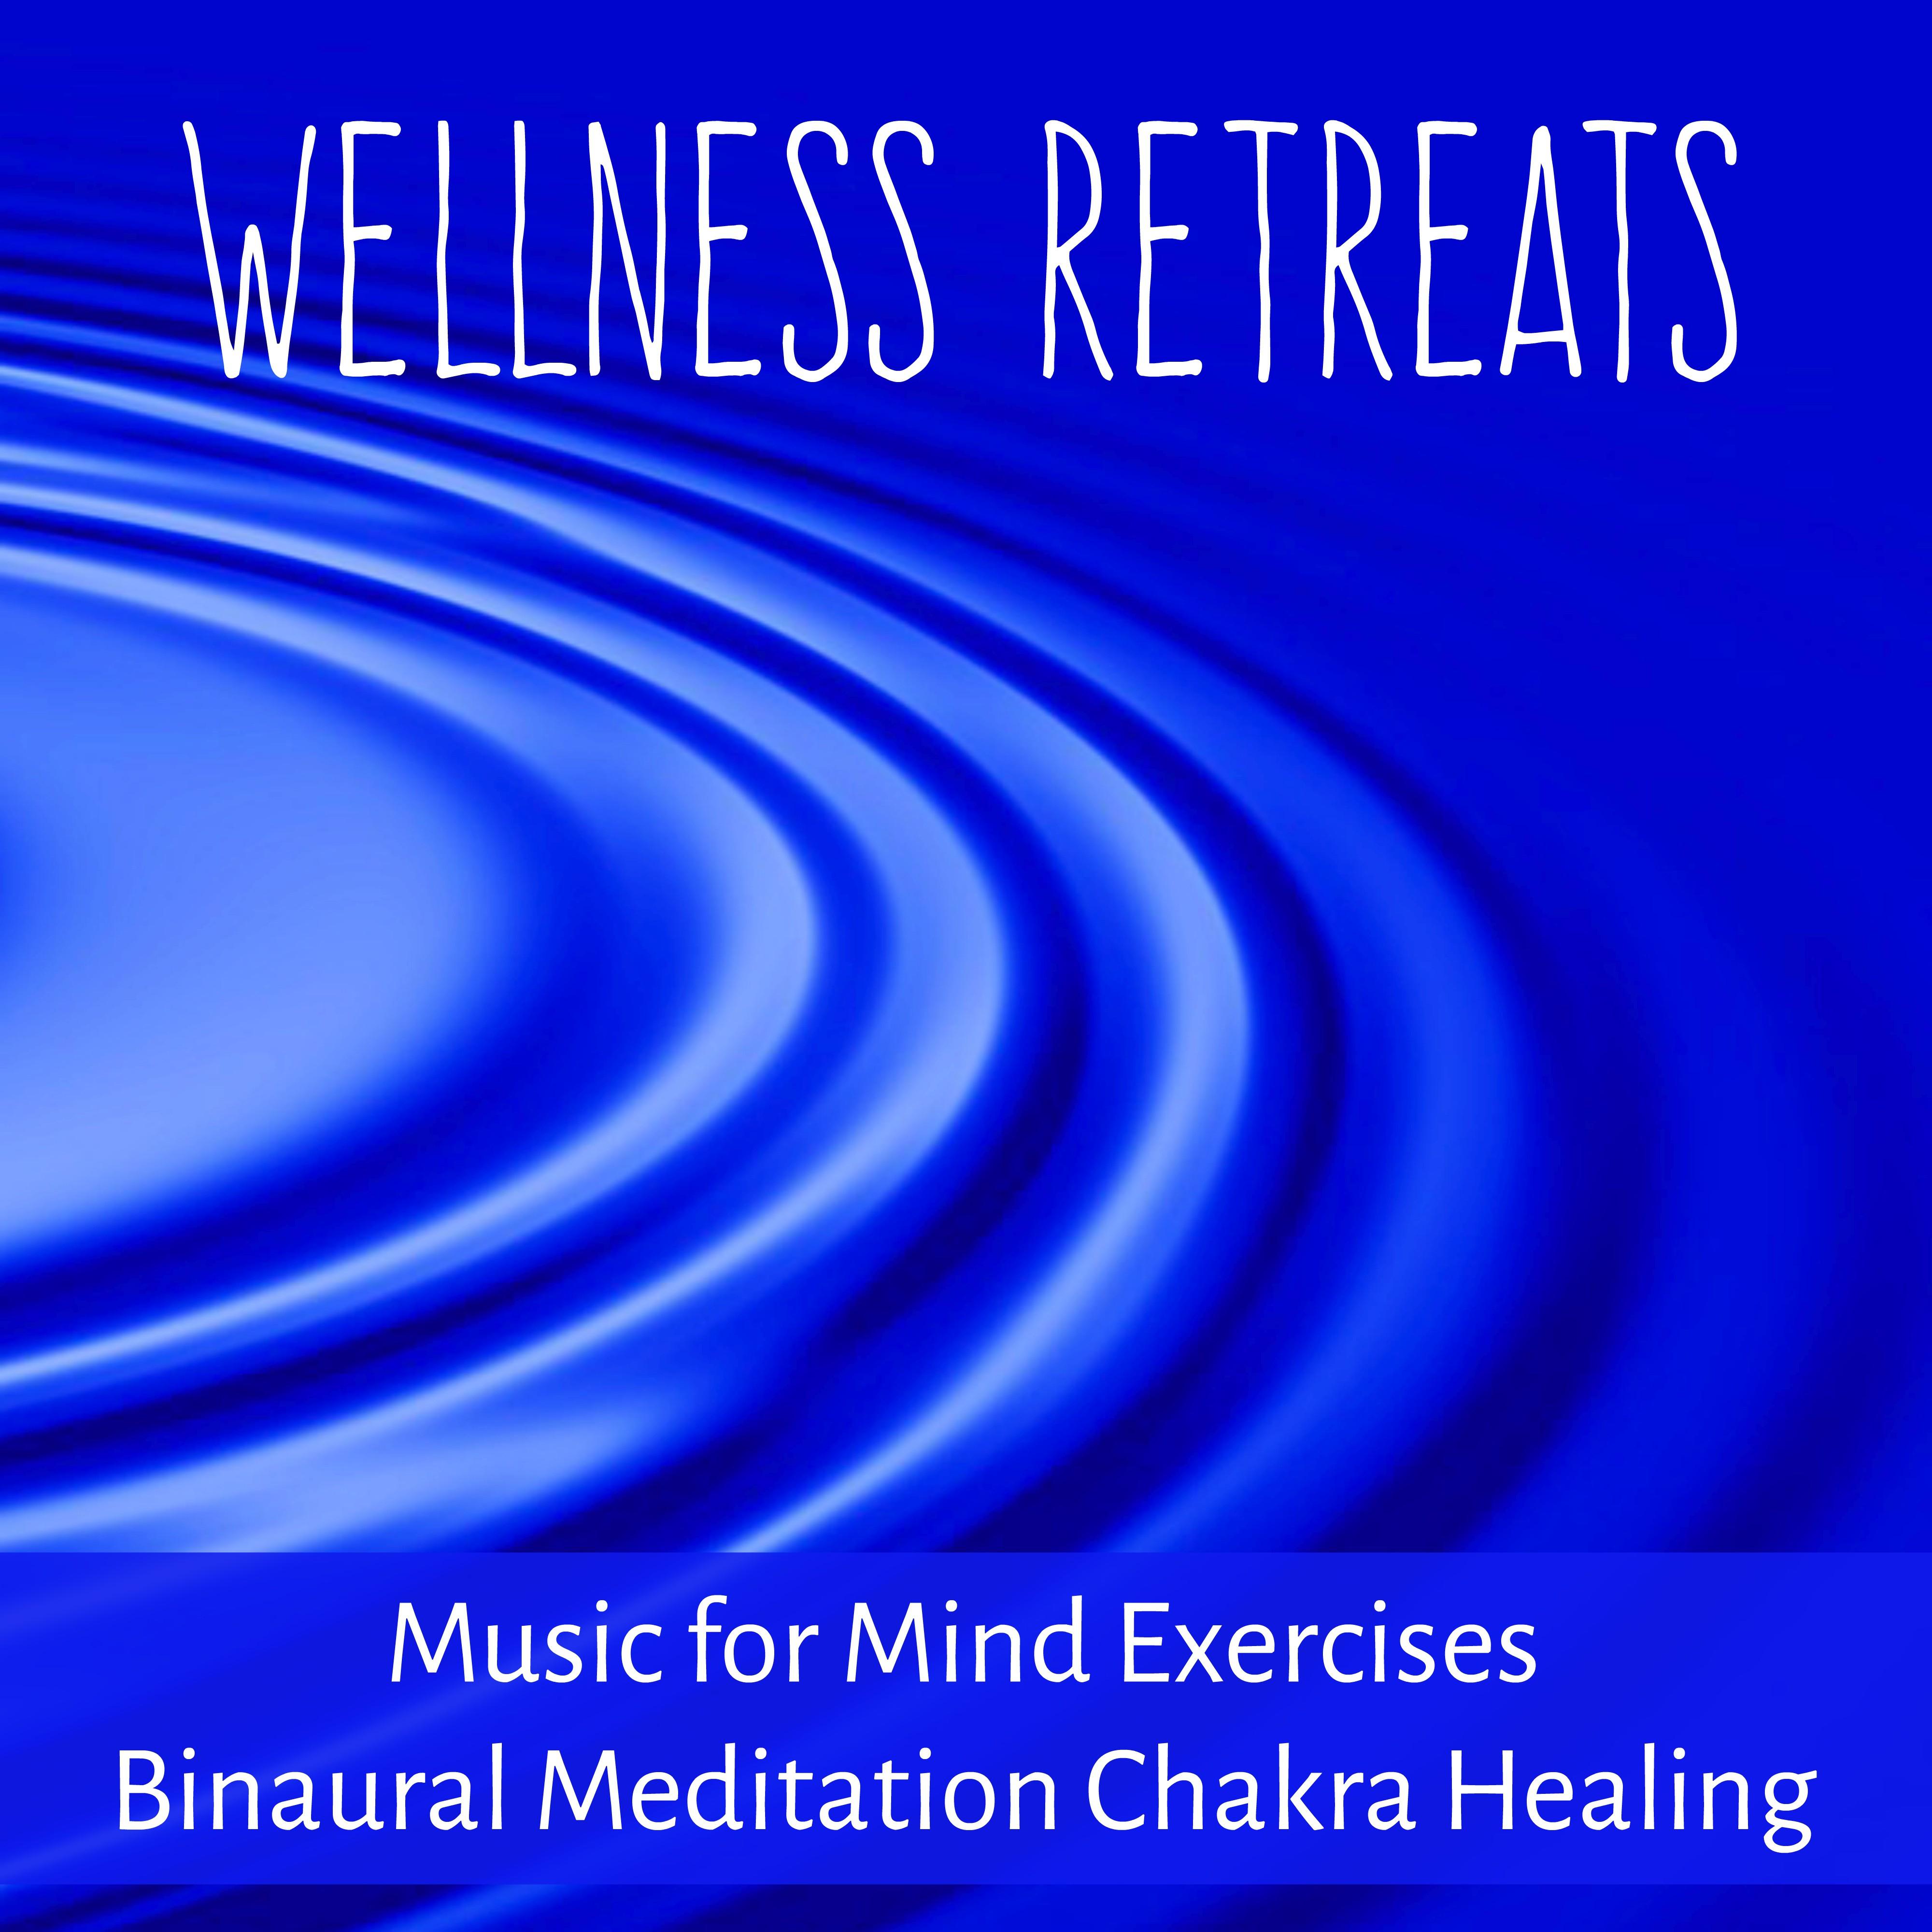 Wellness Retreats - Study Mindfulness Traditional New Age Music for Mind Exercises Binaural Meditation Chakra Healing with Nature Instrumental Relaxing Sounds